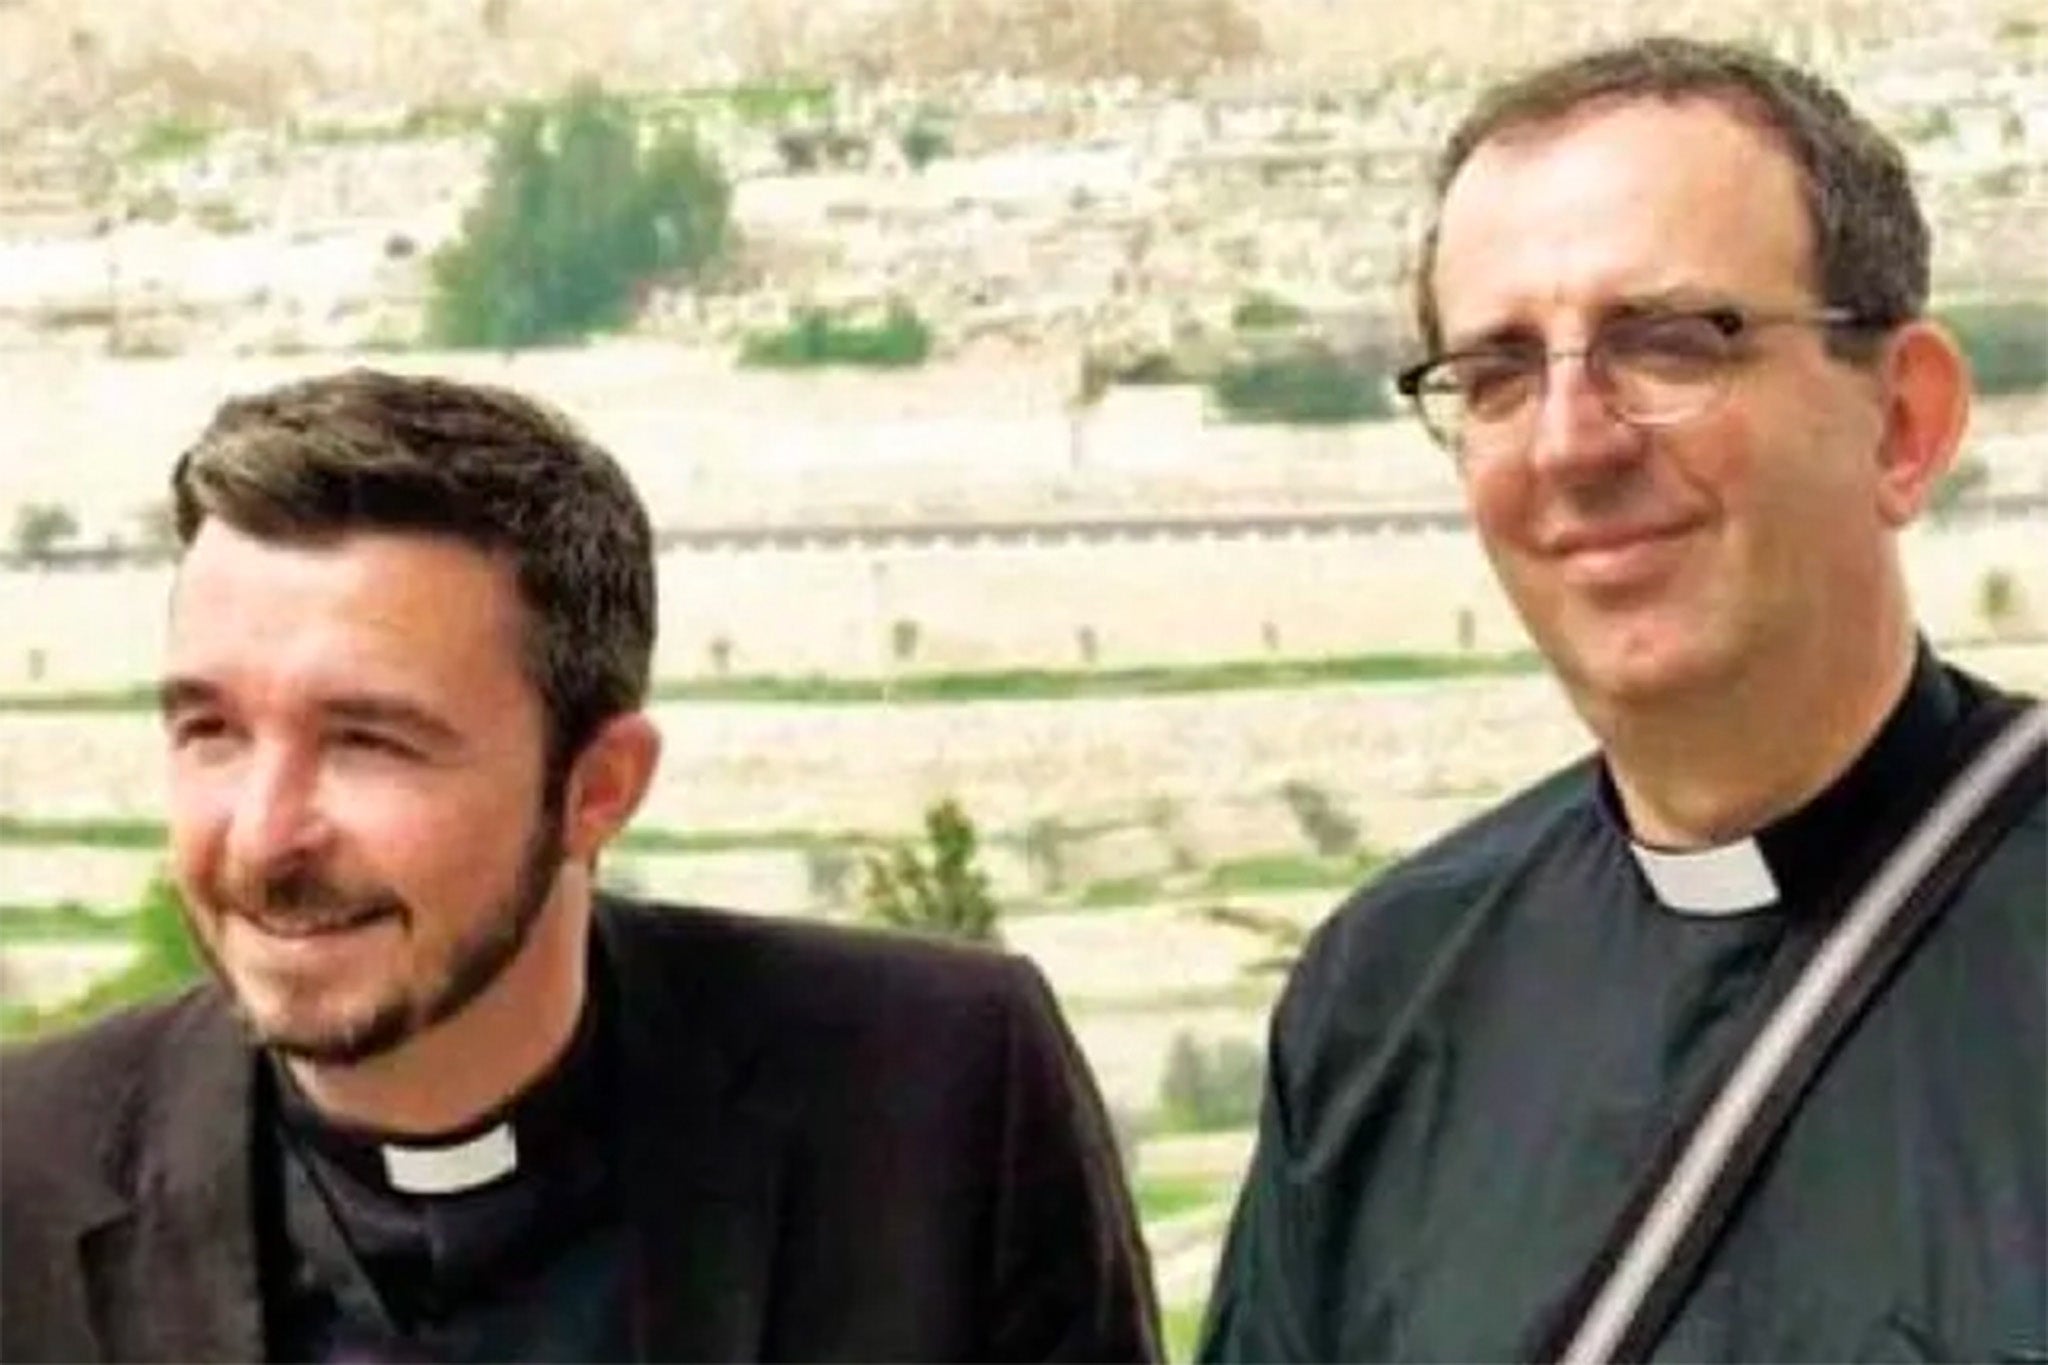 David Coles, left, and Richard Coles were together from 2007 until the former’s death in 2019